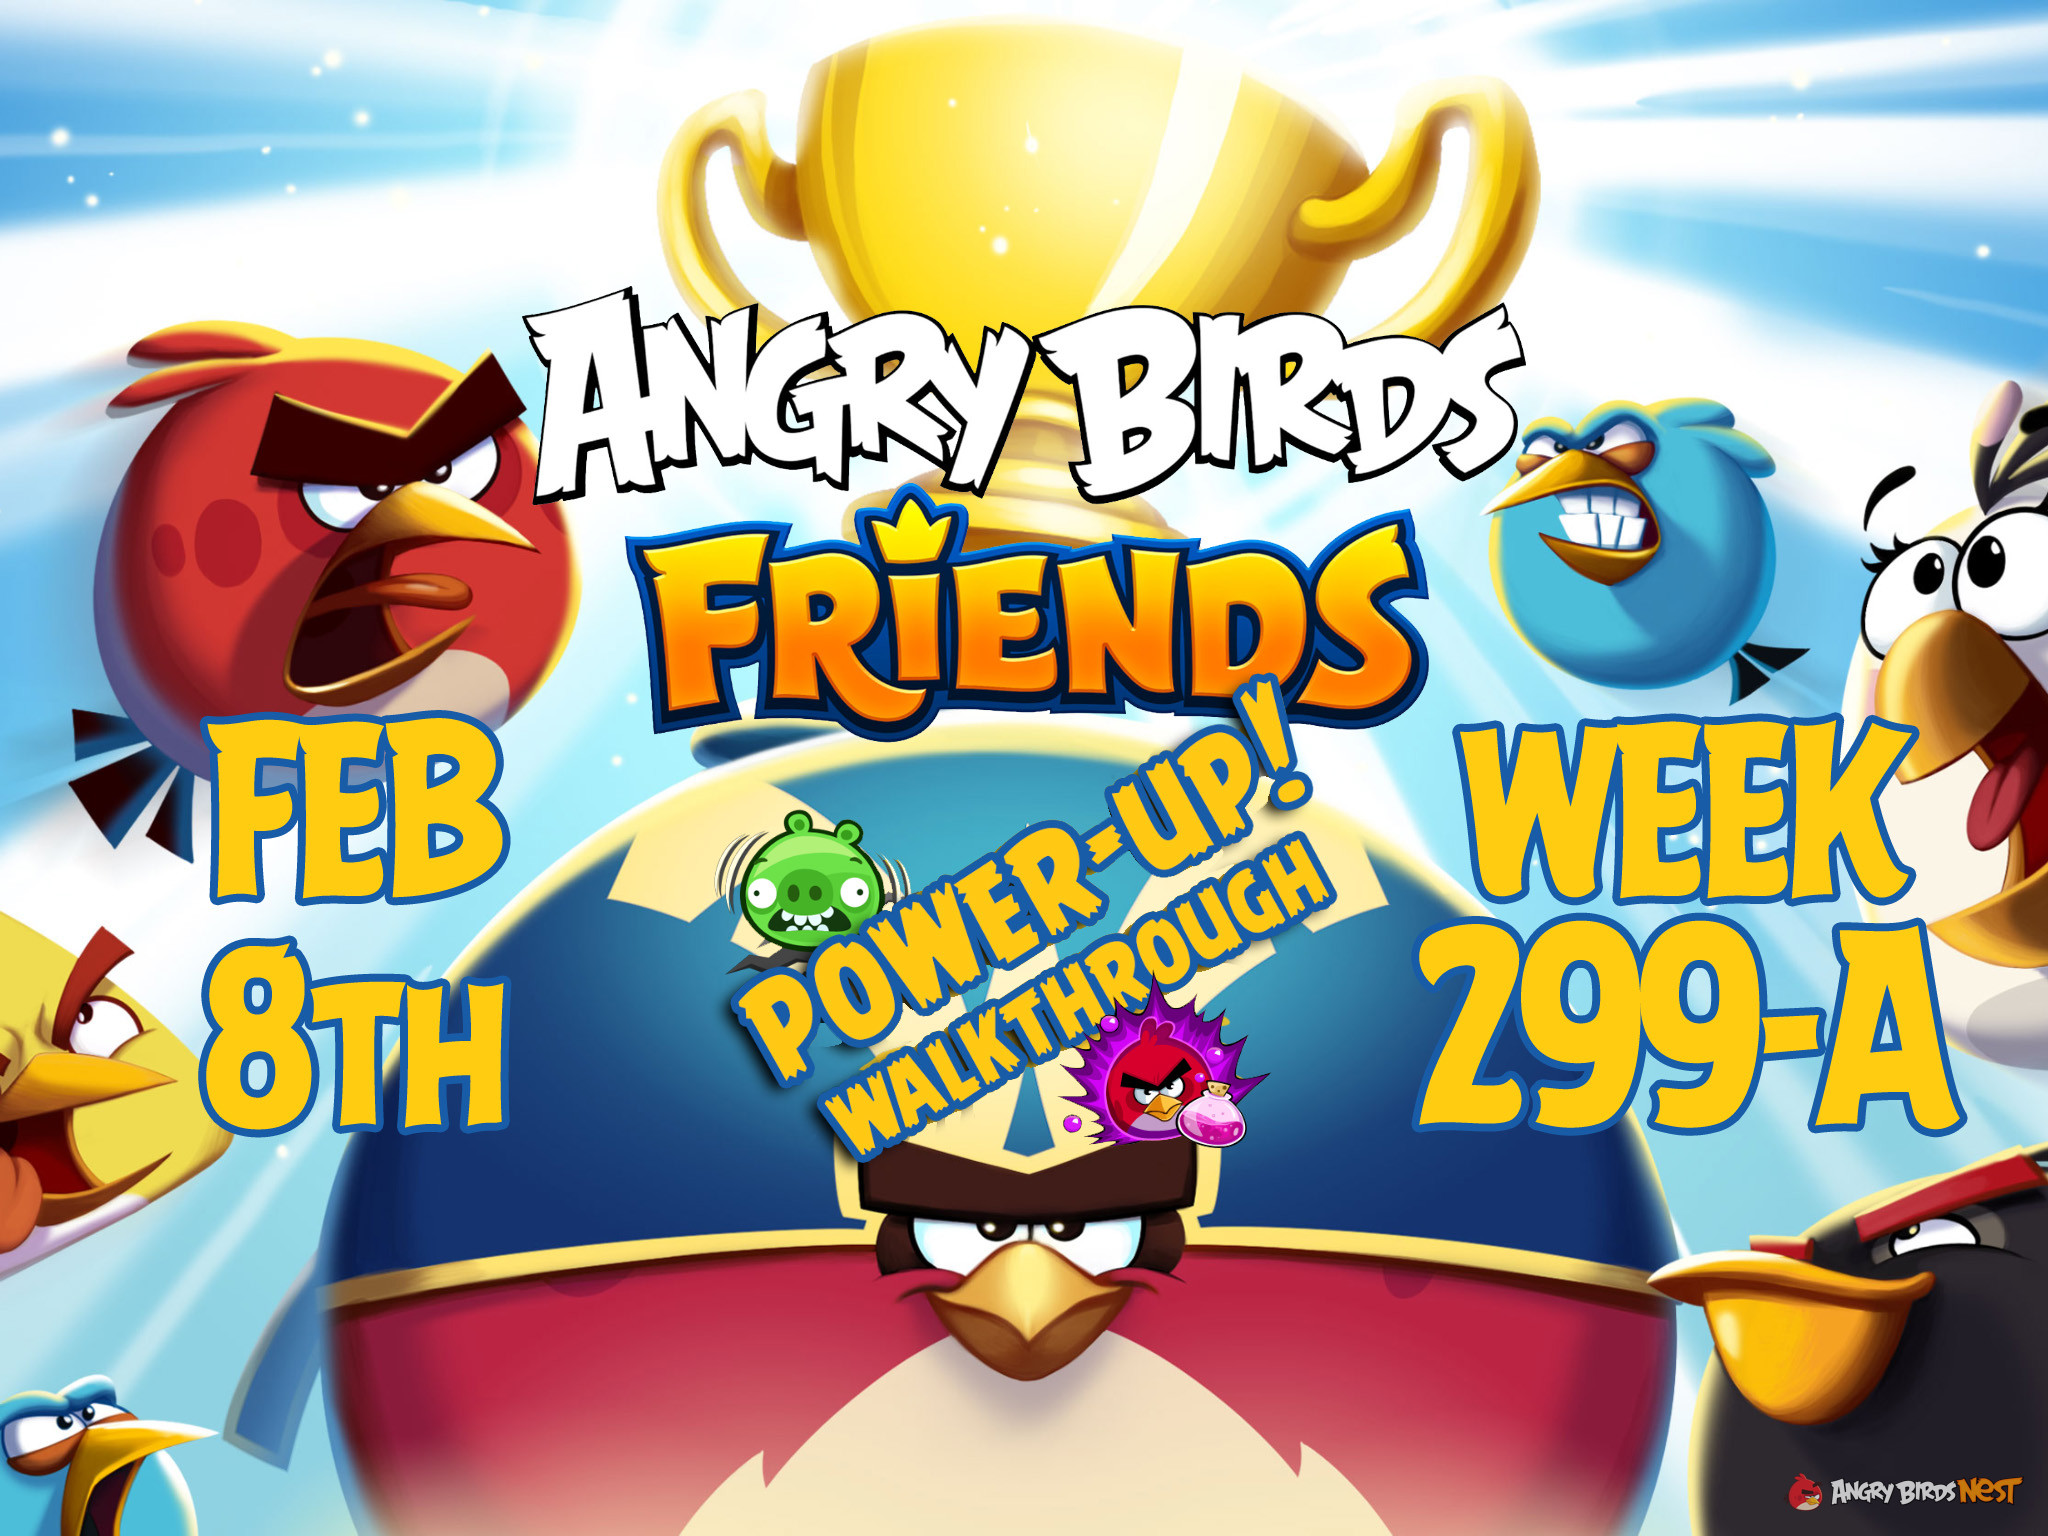 Angry Birds Friends Tournament Week 299-A Feature Image PU